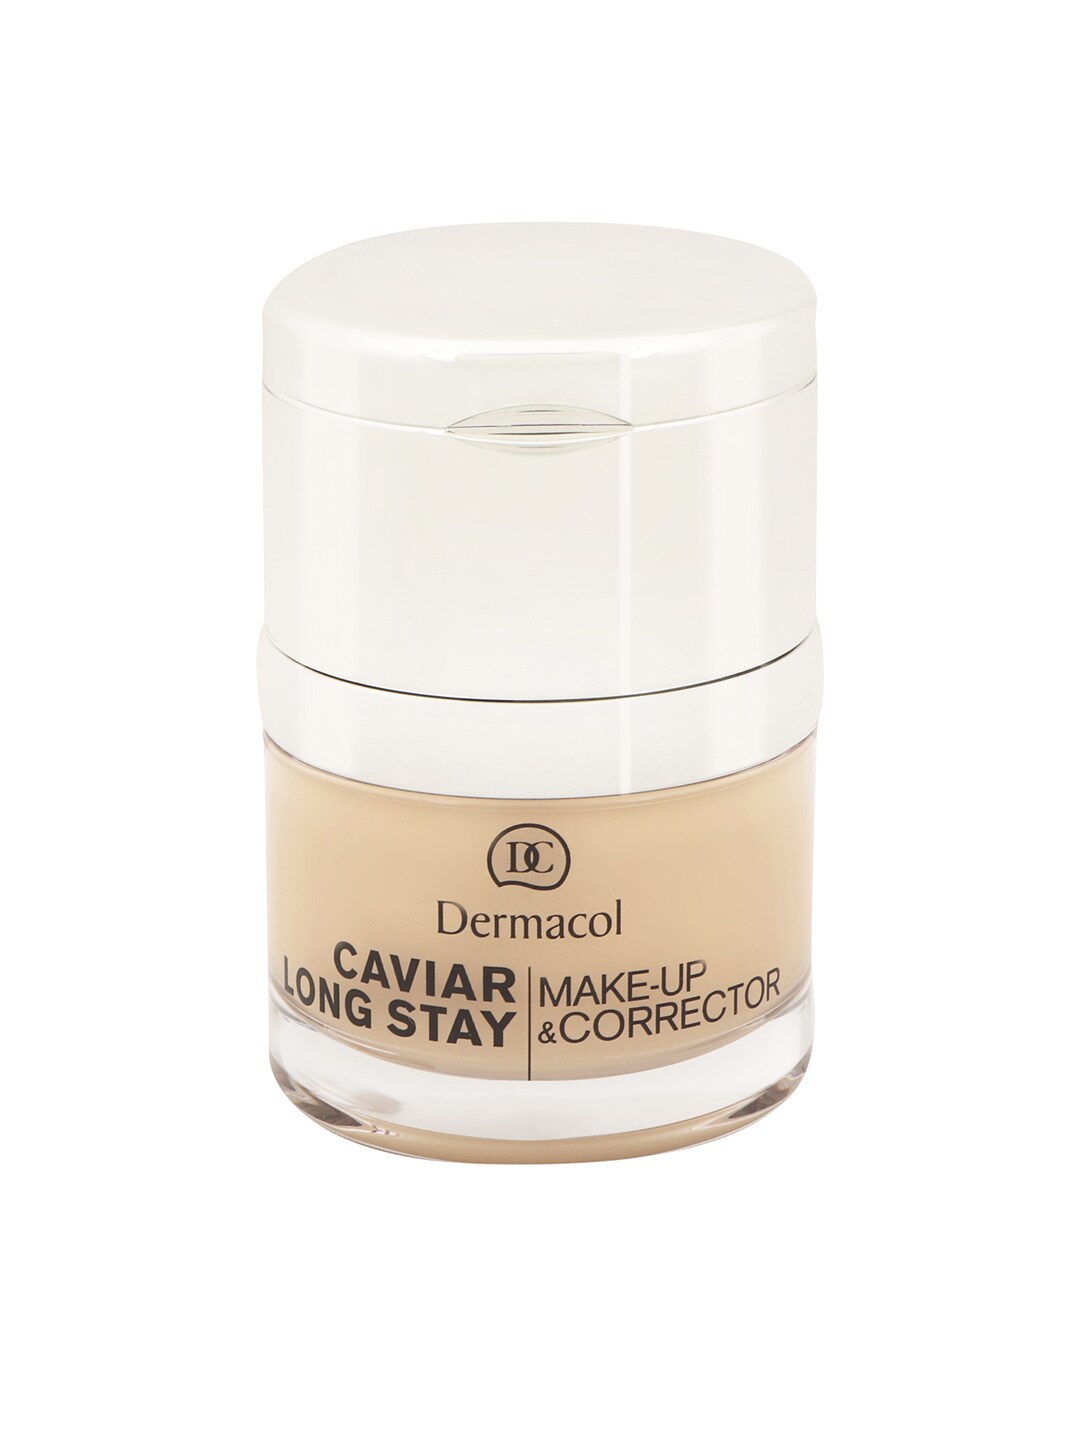 Dermacol 1248A Caviar Long Stay Make-up and Corrector 30 ml Price in India